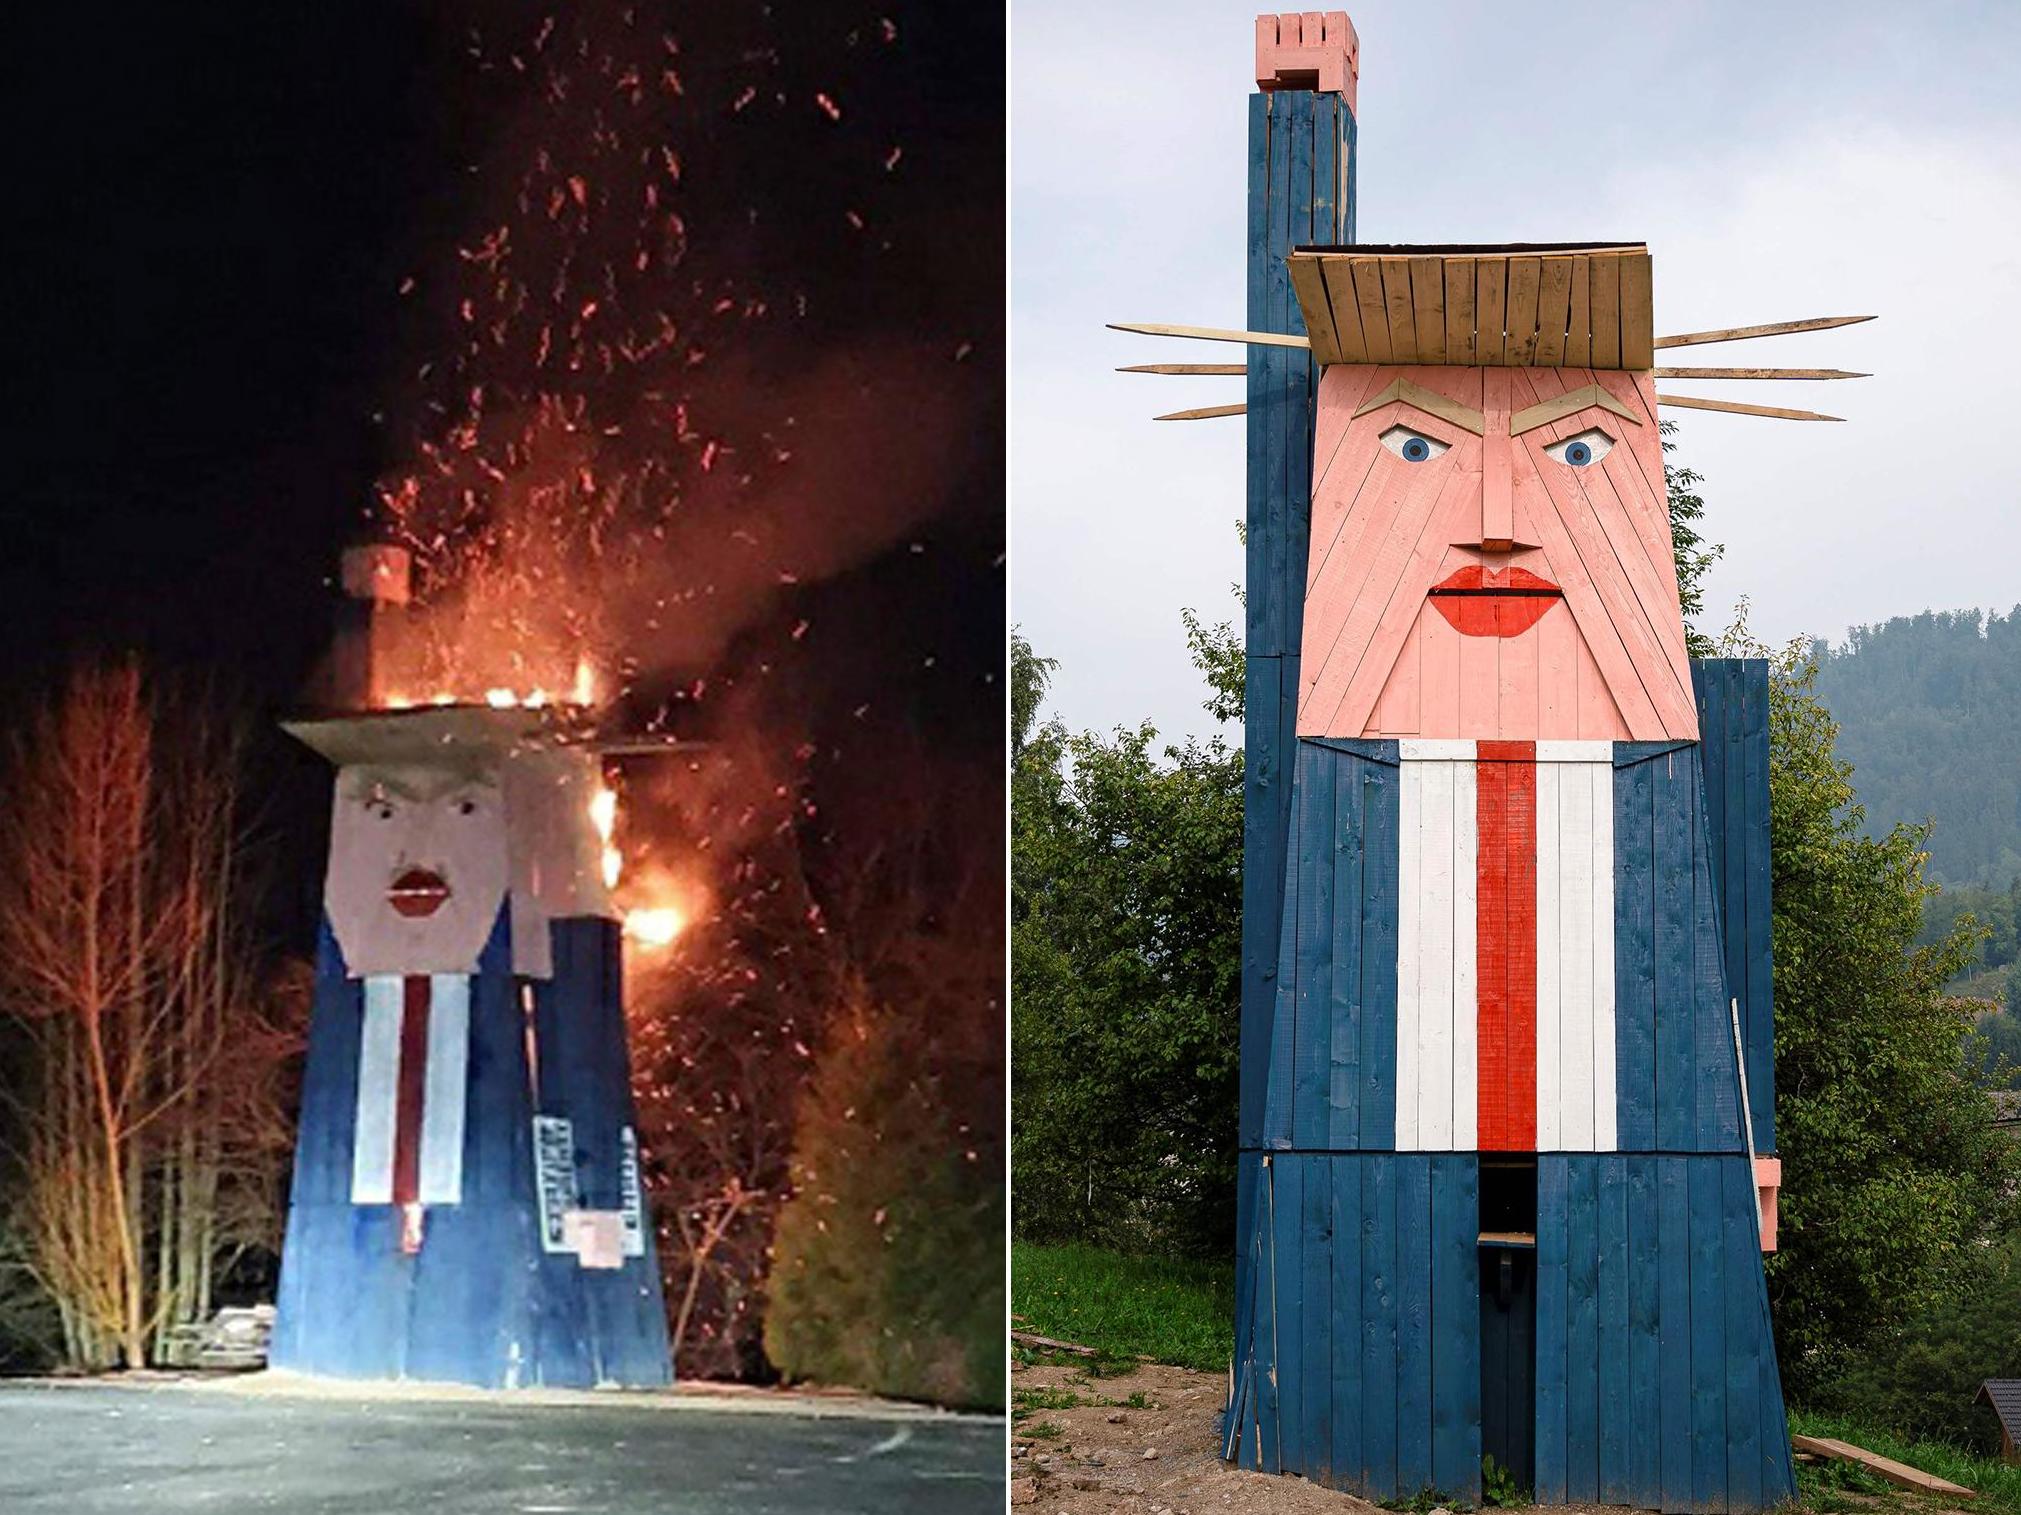 Trump statues haven't done well around arsonists lately